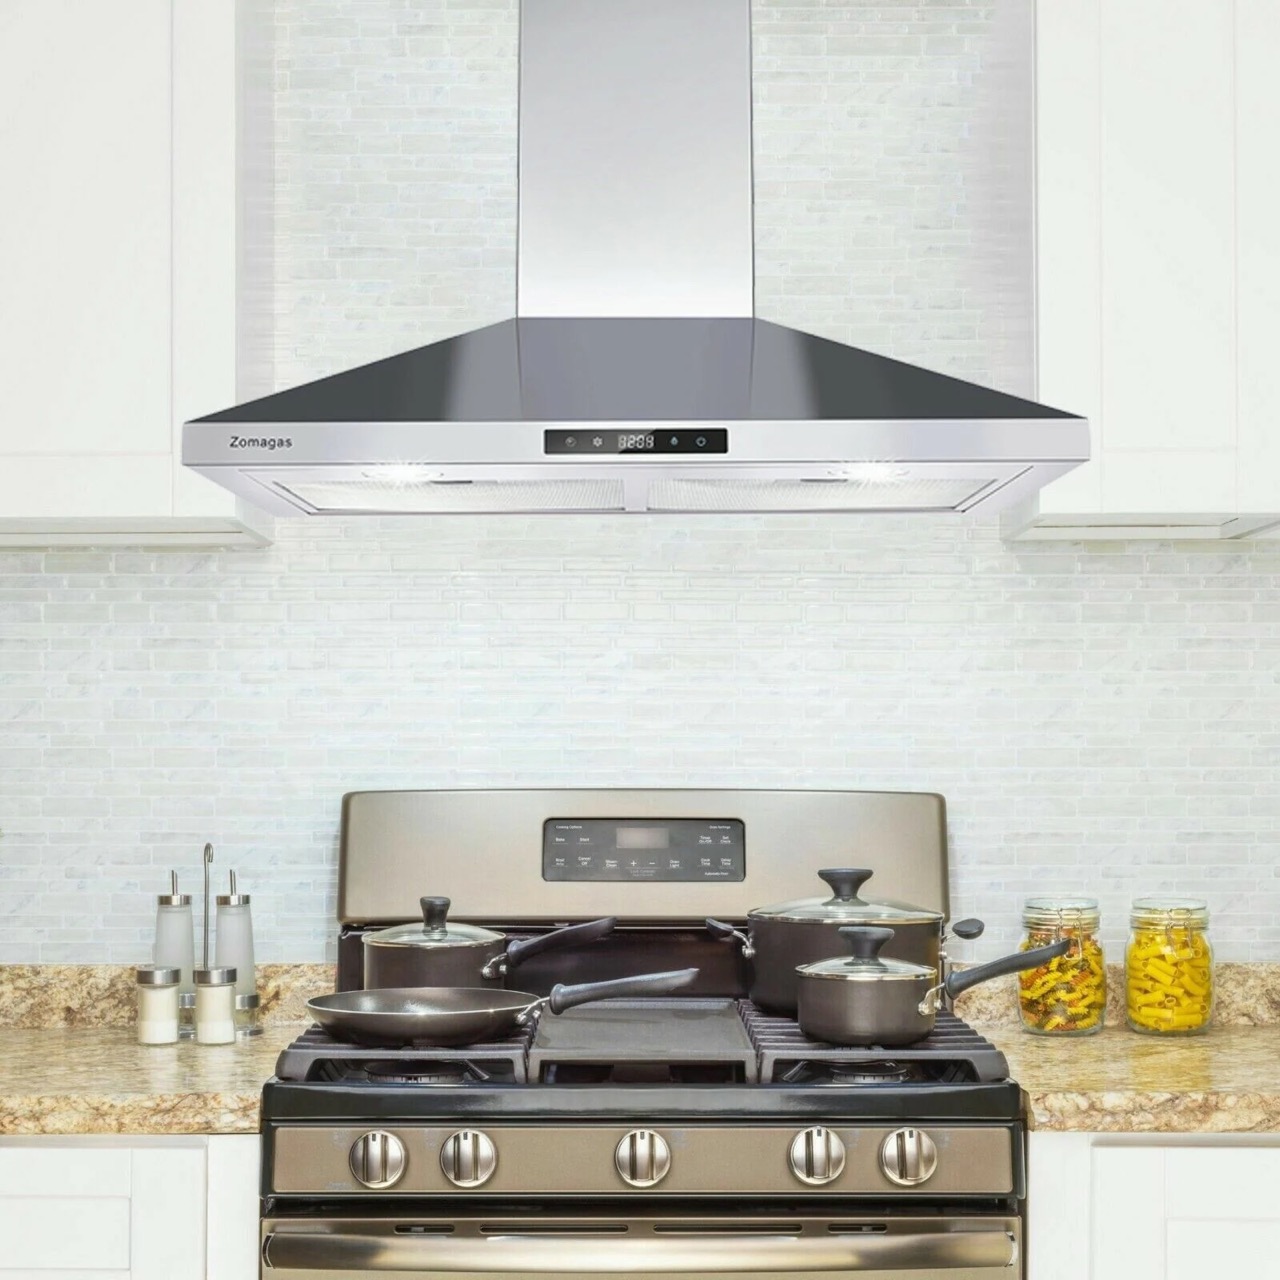 FIREGAS 30 inch Wall Mount Range Hood, Stainless Steel Stove Vent Hood with 3 Speed Exhaust Fan, Aluminum Mesh Filters, Ducted/Ductless Convertible